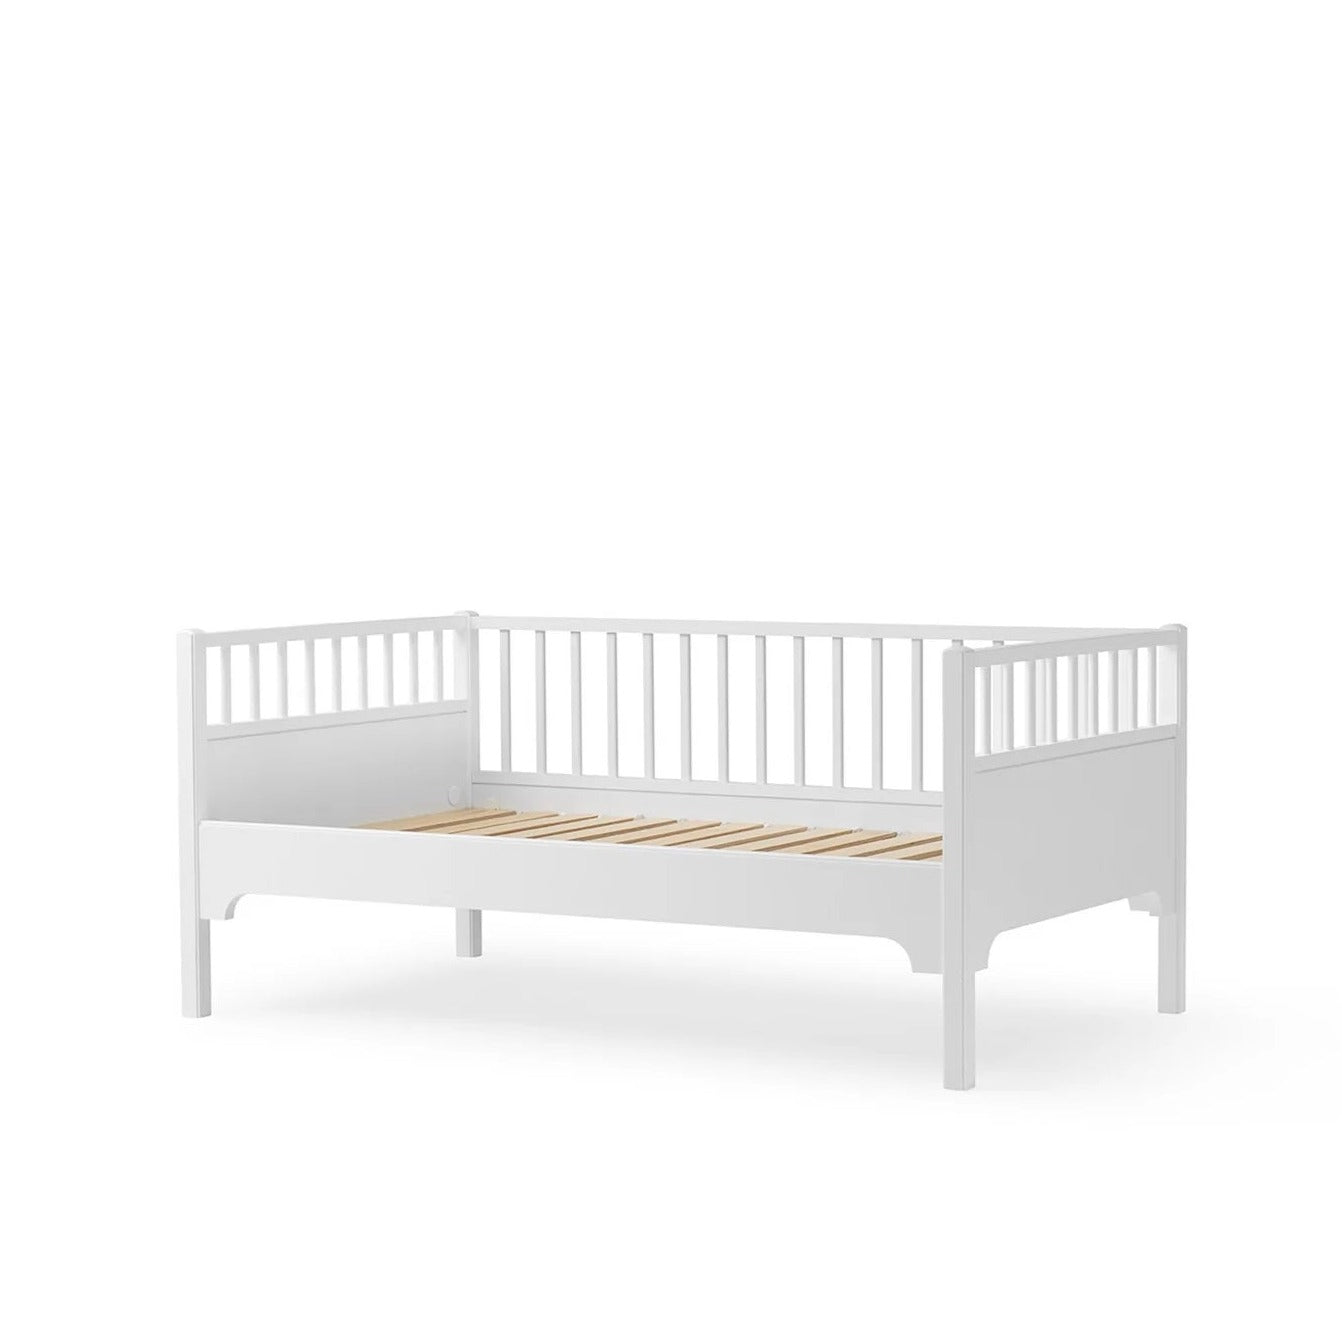 Oliver Furniture Seaside Classic Junior Day Bed